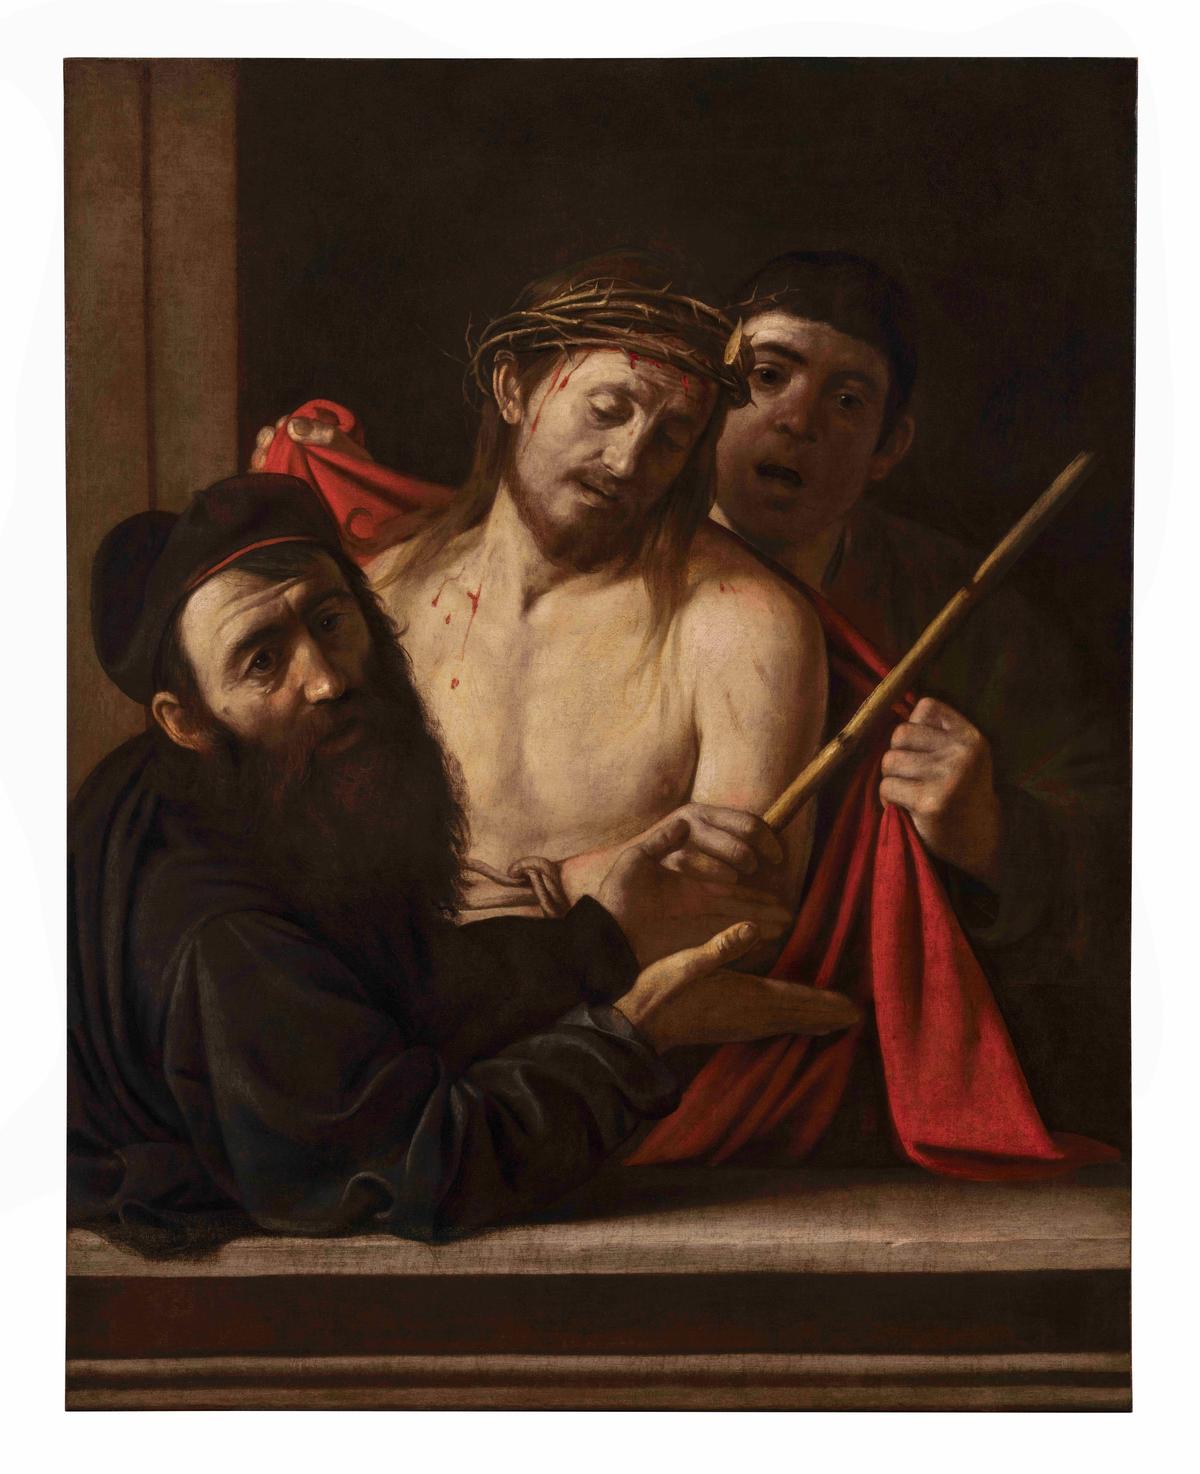 New 'Caravaggio' work—once estimated at auction for €1,500—to go on show at  the Prado